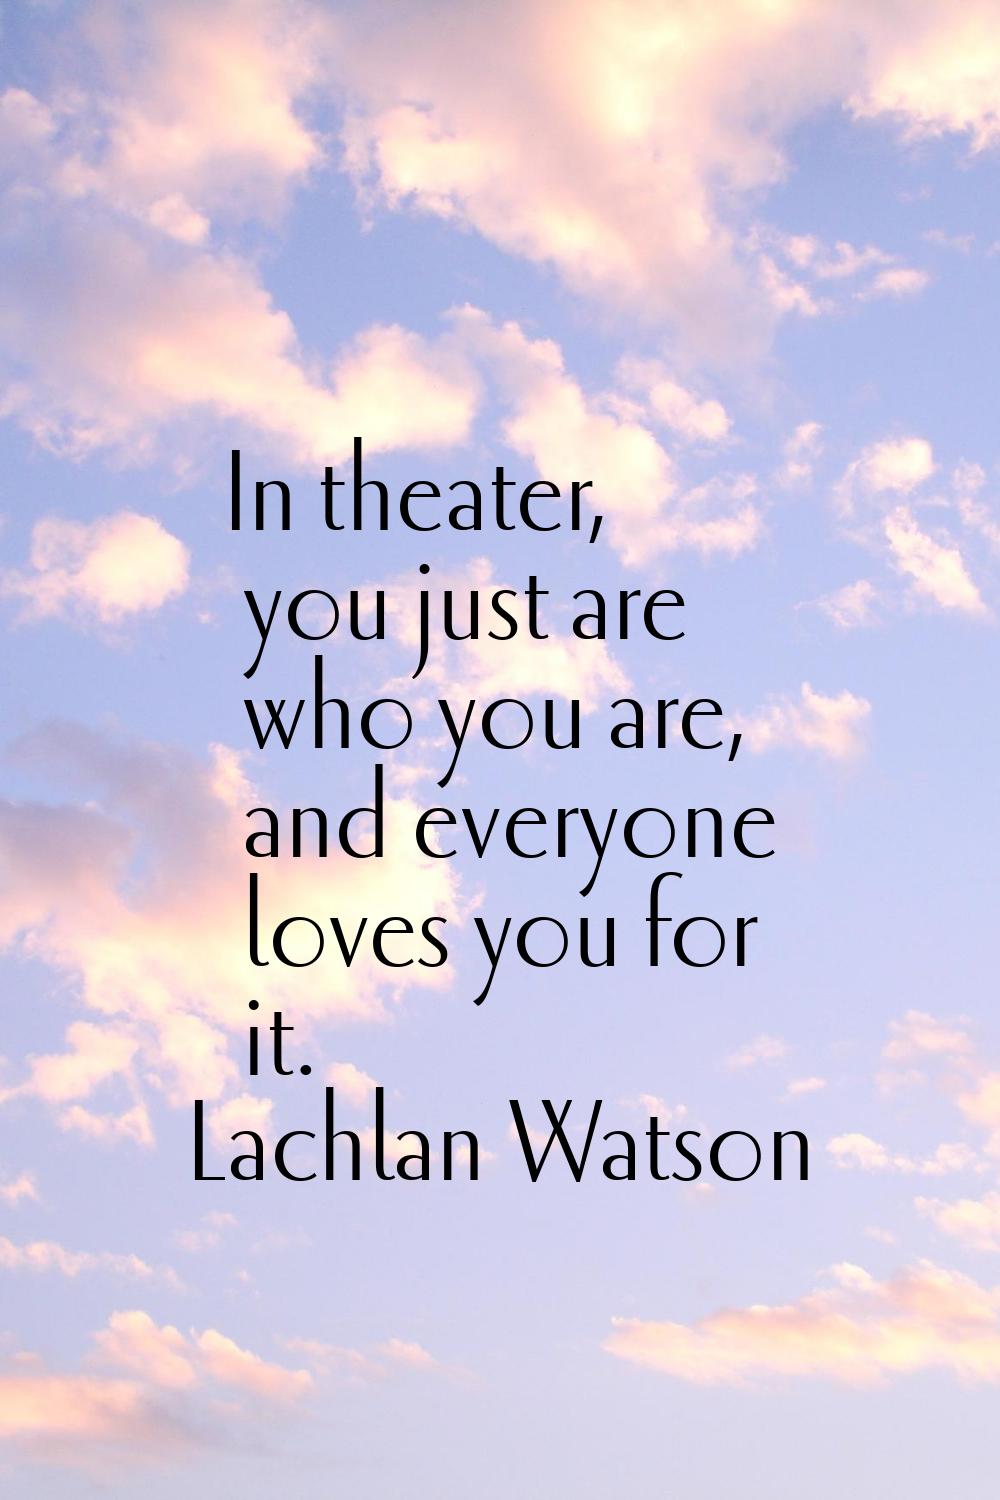 In theater, you just are who you are, and everyone loves you for it.